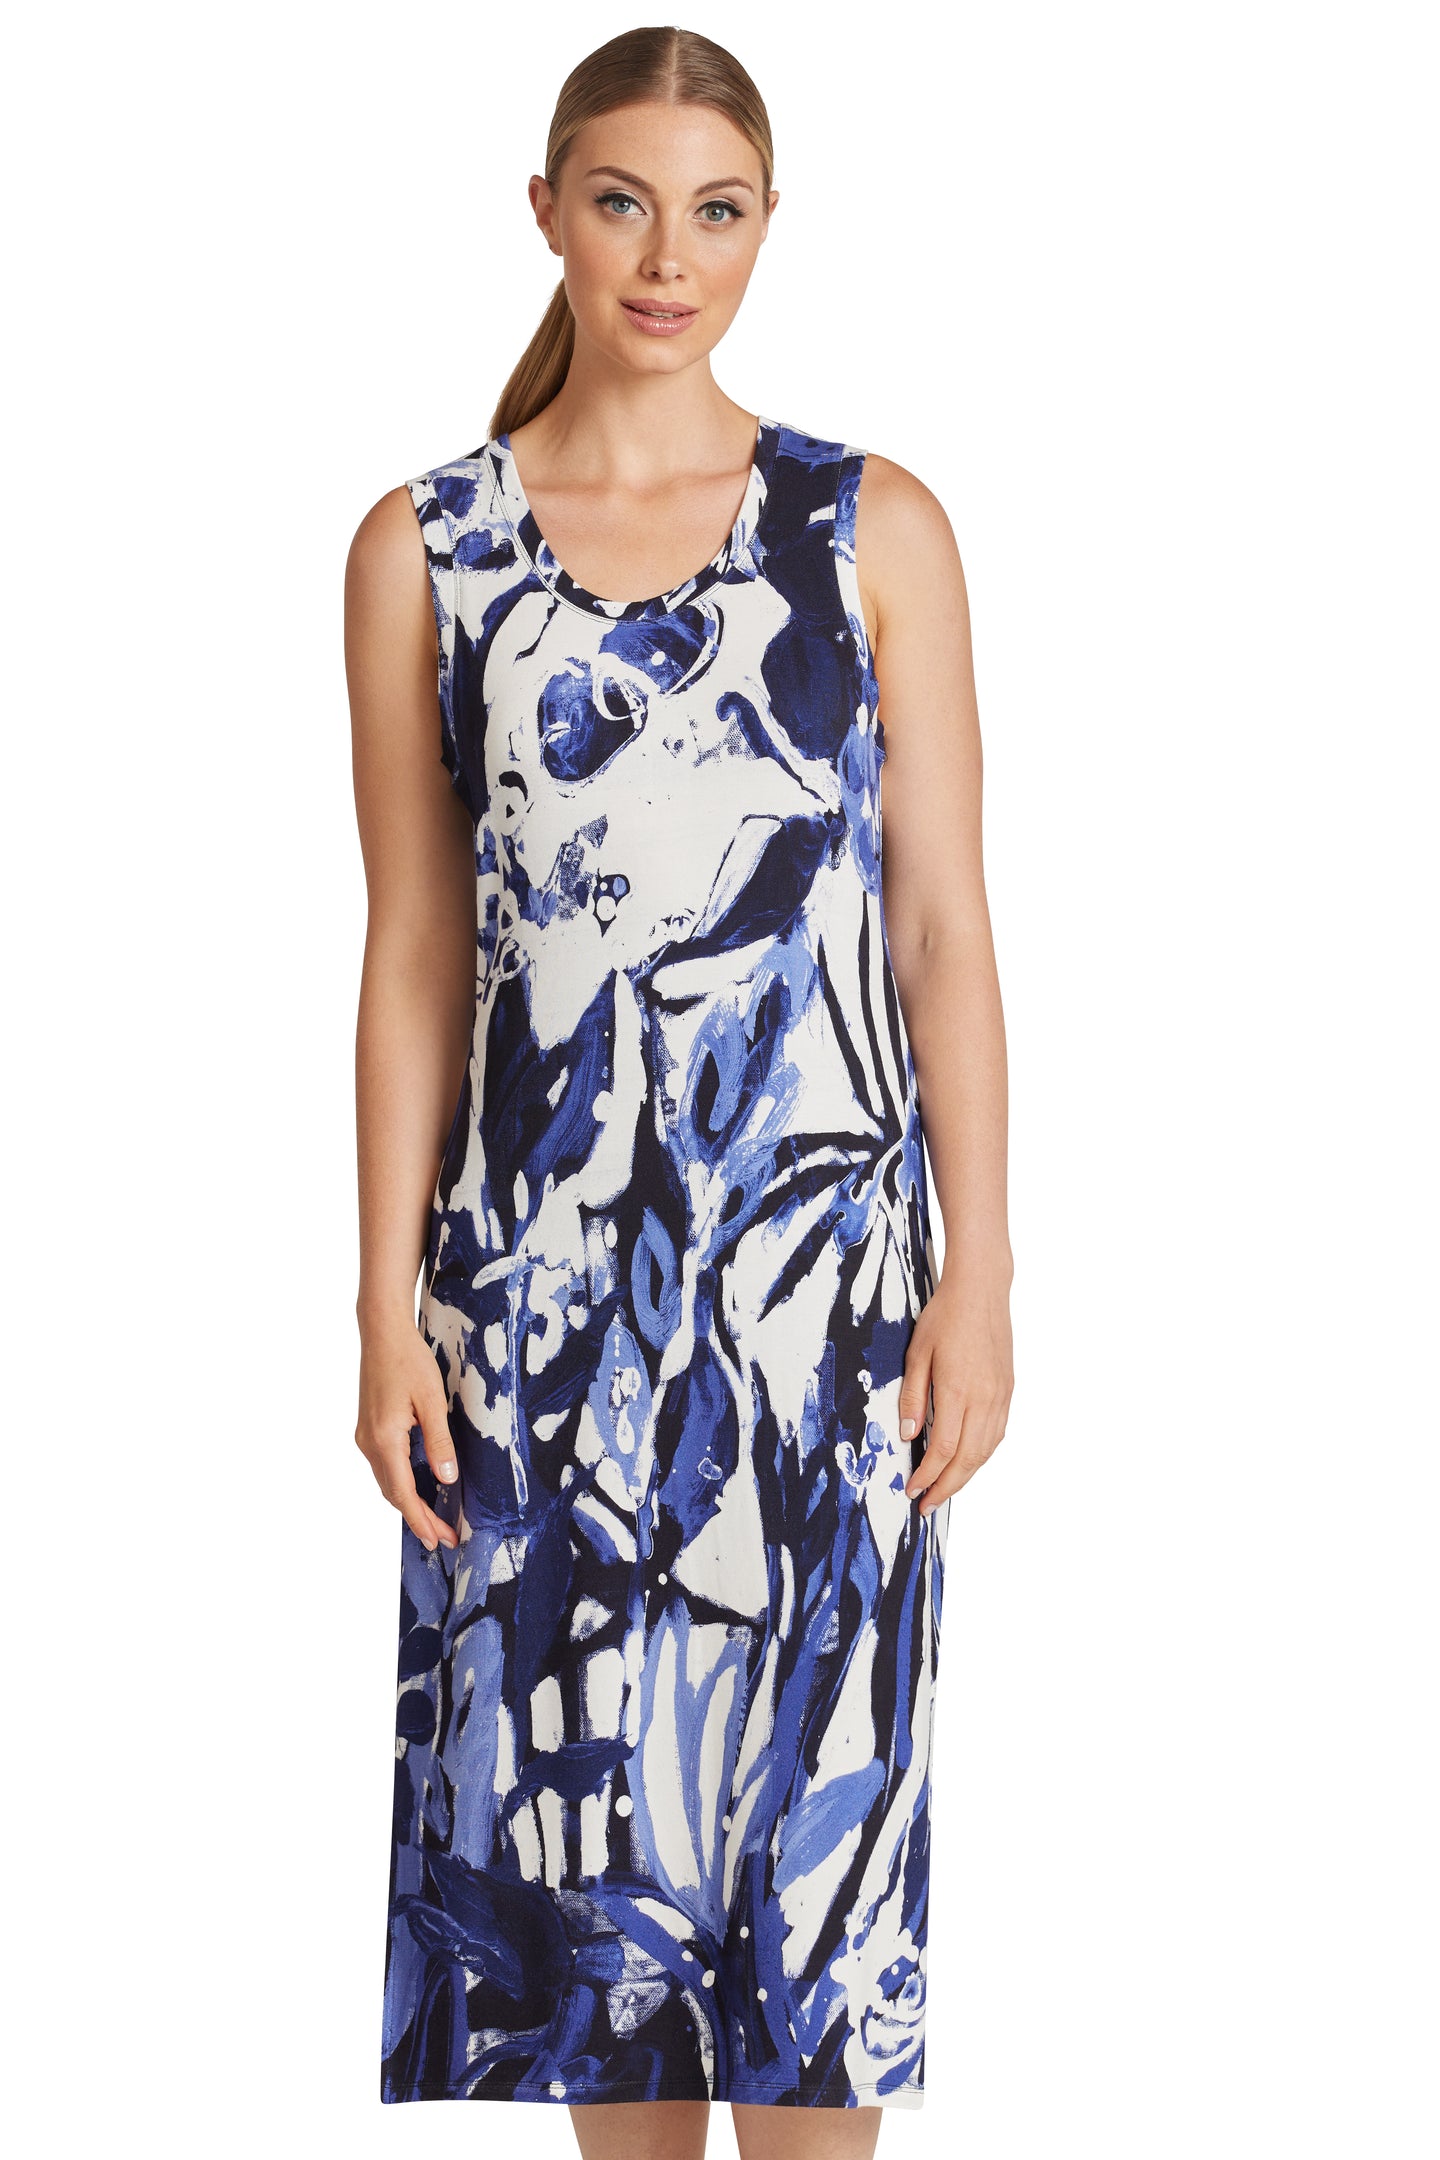 Blue & White: At Liberty in the Garden sleeveless relaxed fit tank dress